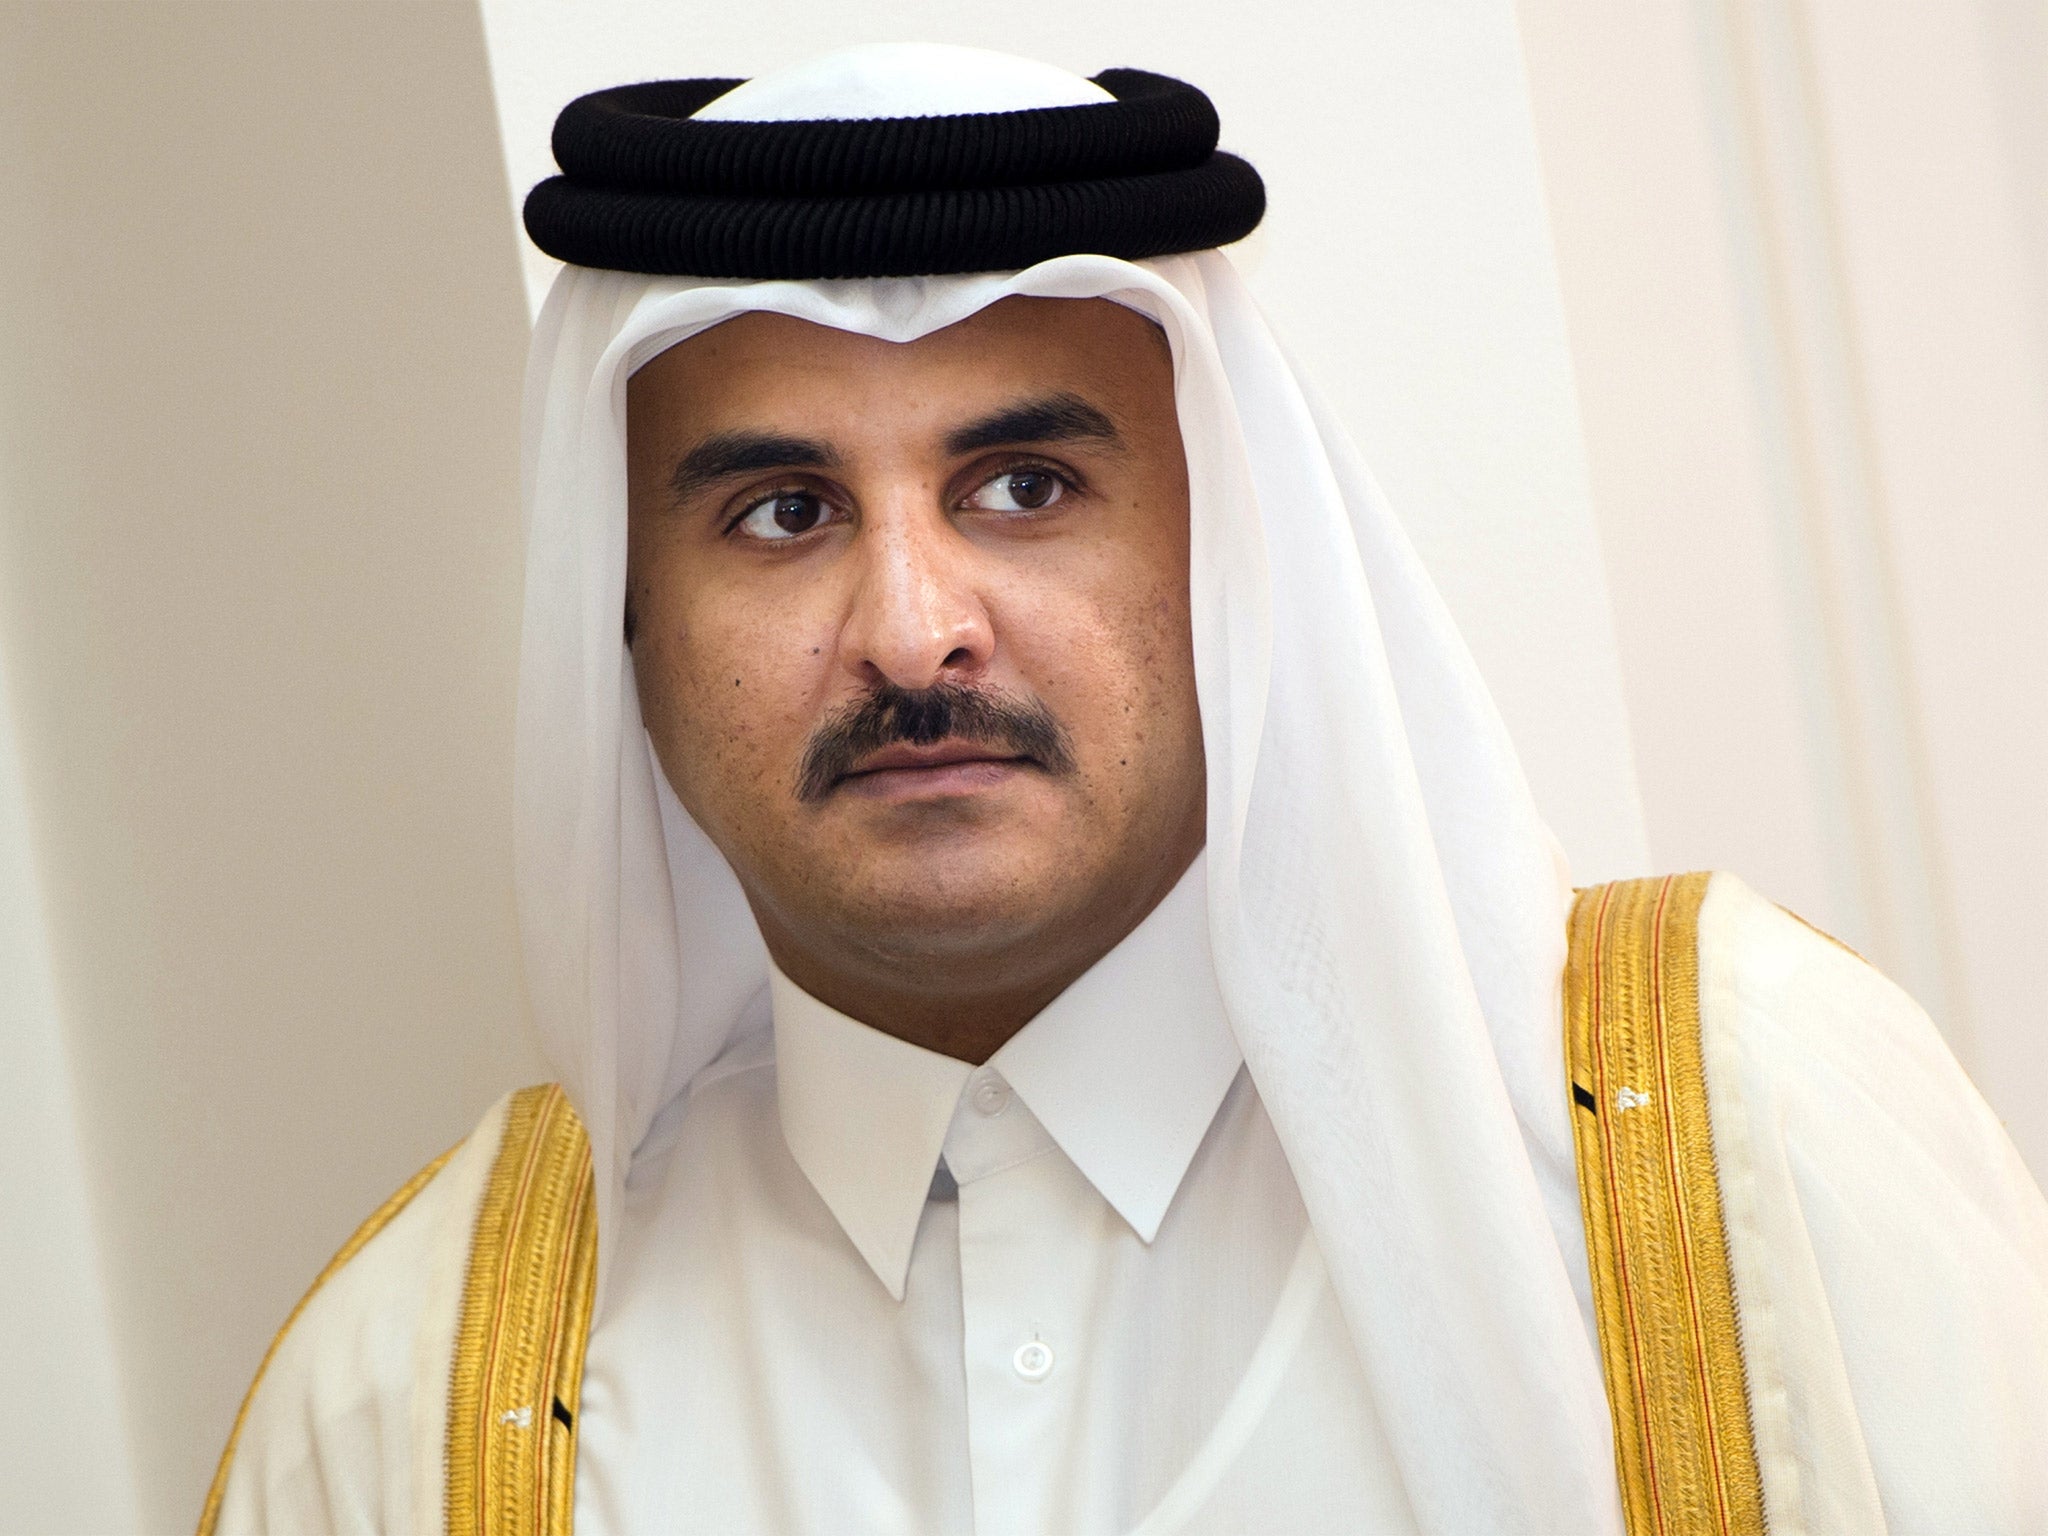 Sheikh Tamim al-Thani, Qatar’s ruler, is unlikely to bow to Saudi Arabia’s political demands